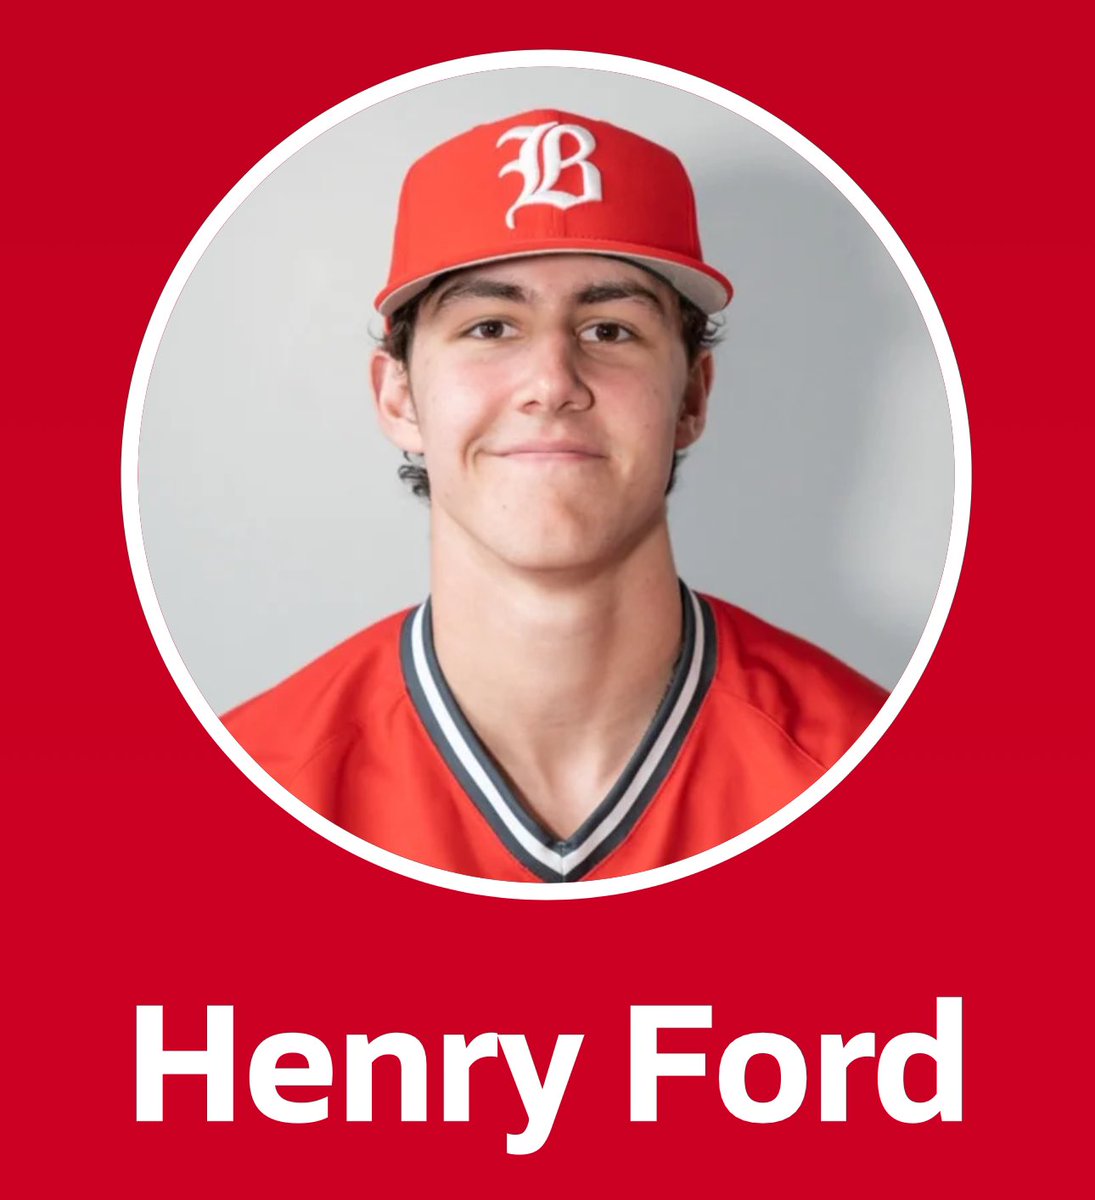 Besides being the only two guys in D1 to hit 3 HR in a game this wknd does anyone else want to guess what Nick Kurtz and Henry Ford have in common?🤔😂